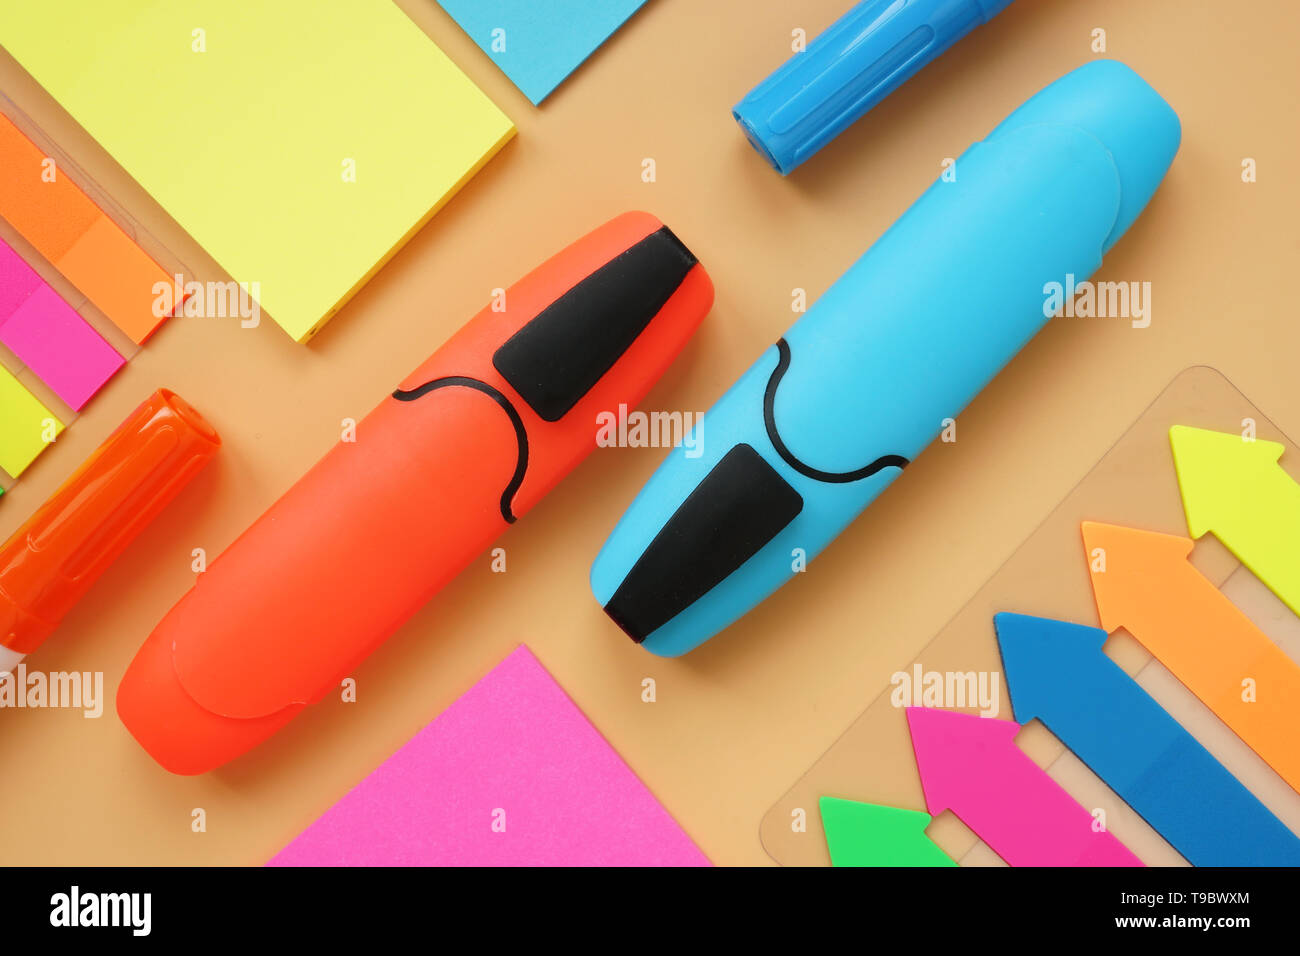 Colorful office supply on an orange surface. Top view of workspace desk. Stock Photo